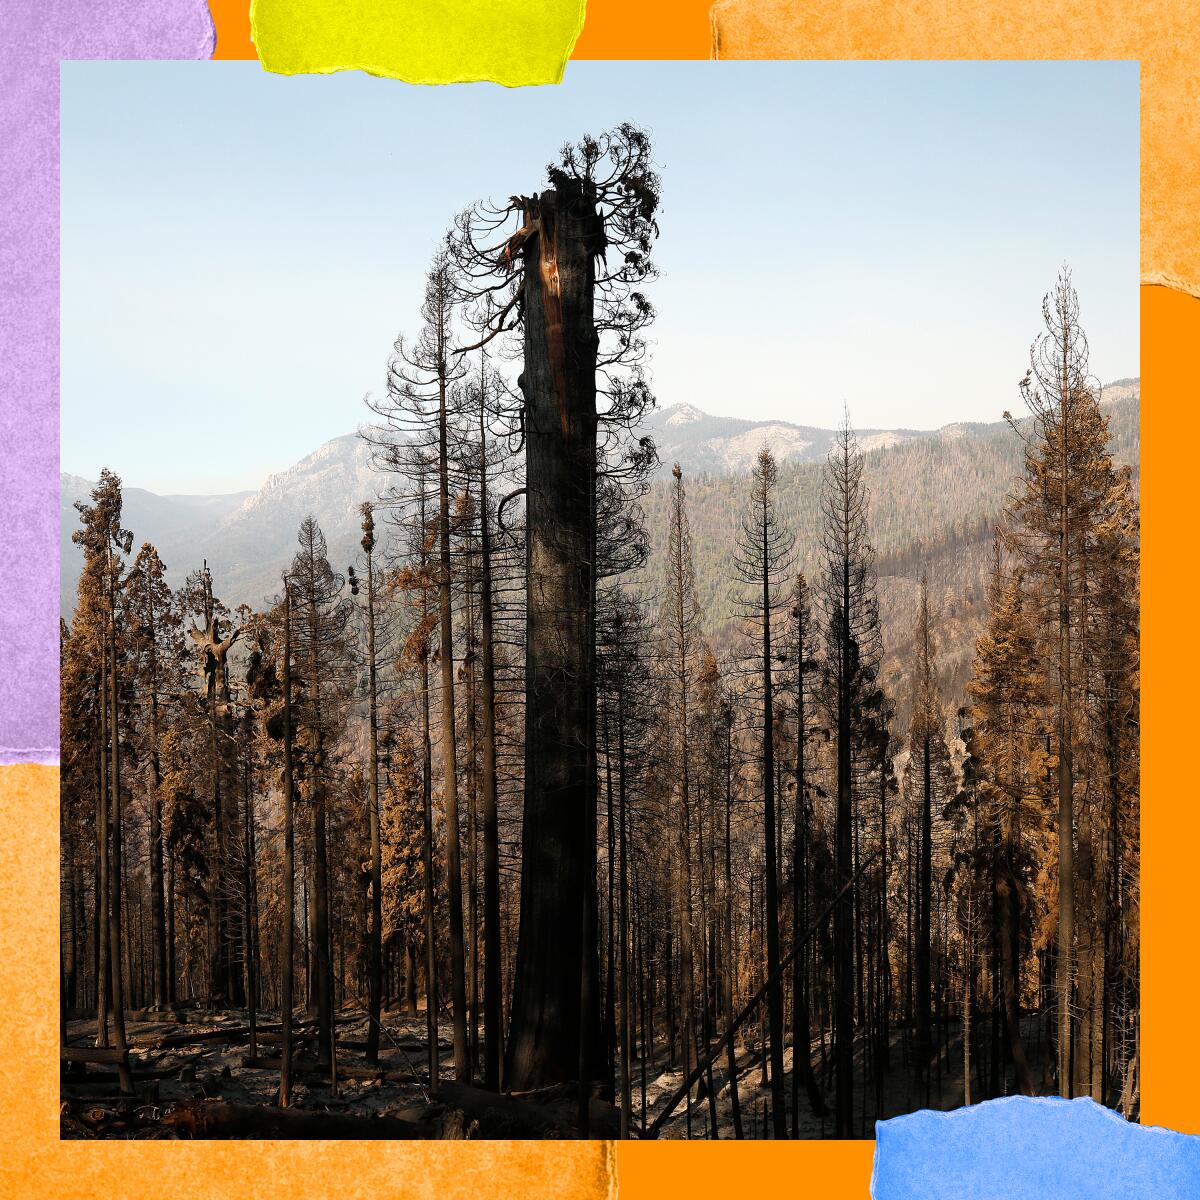 A grove of sequoia trees damaged by fire